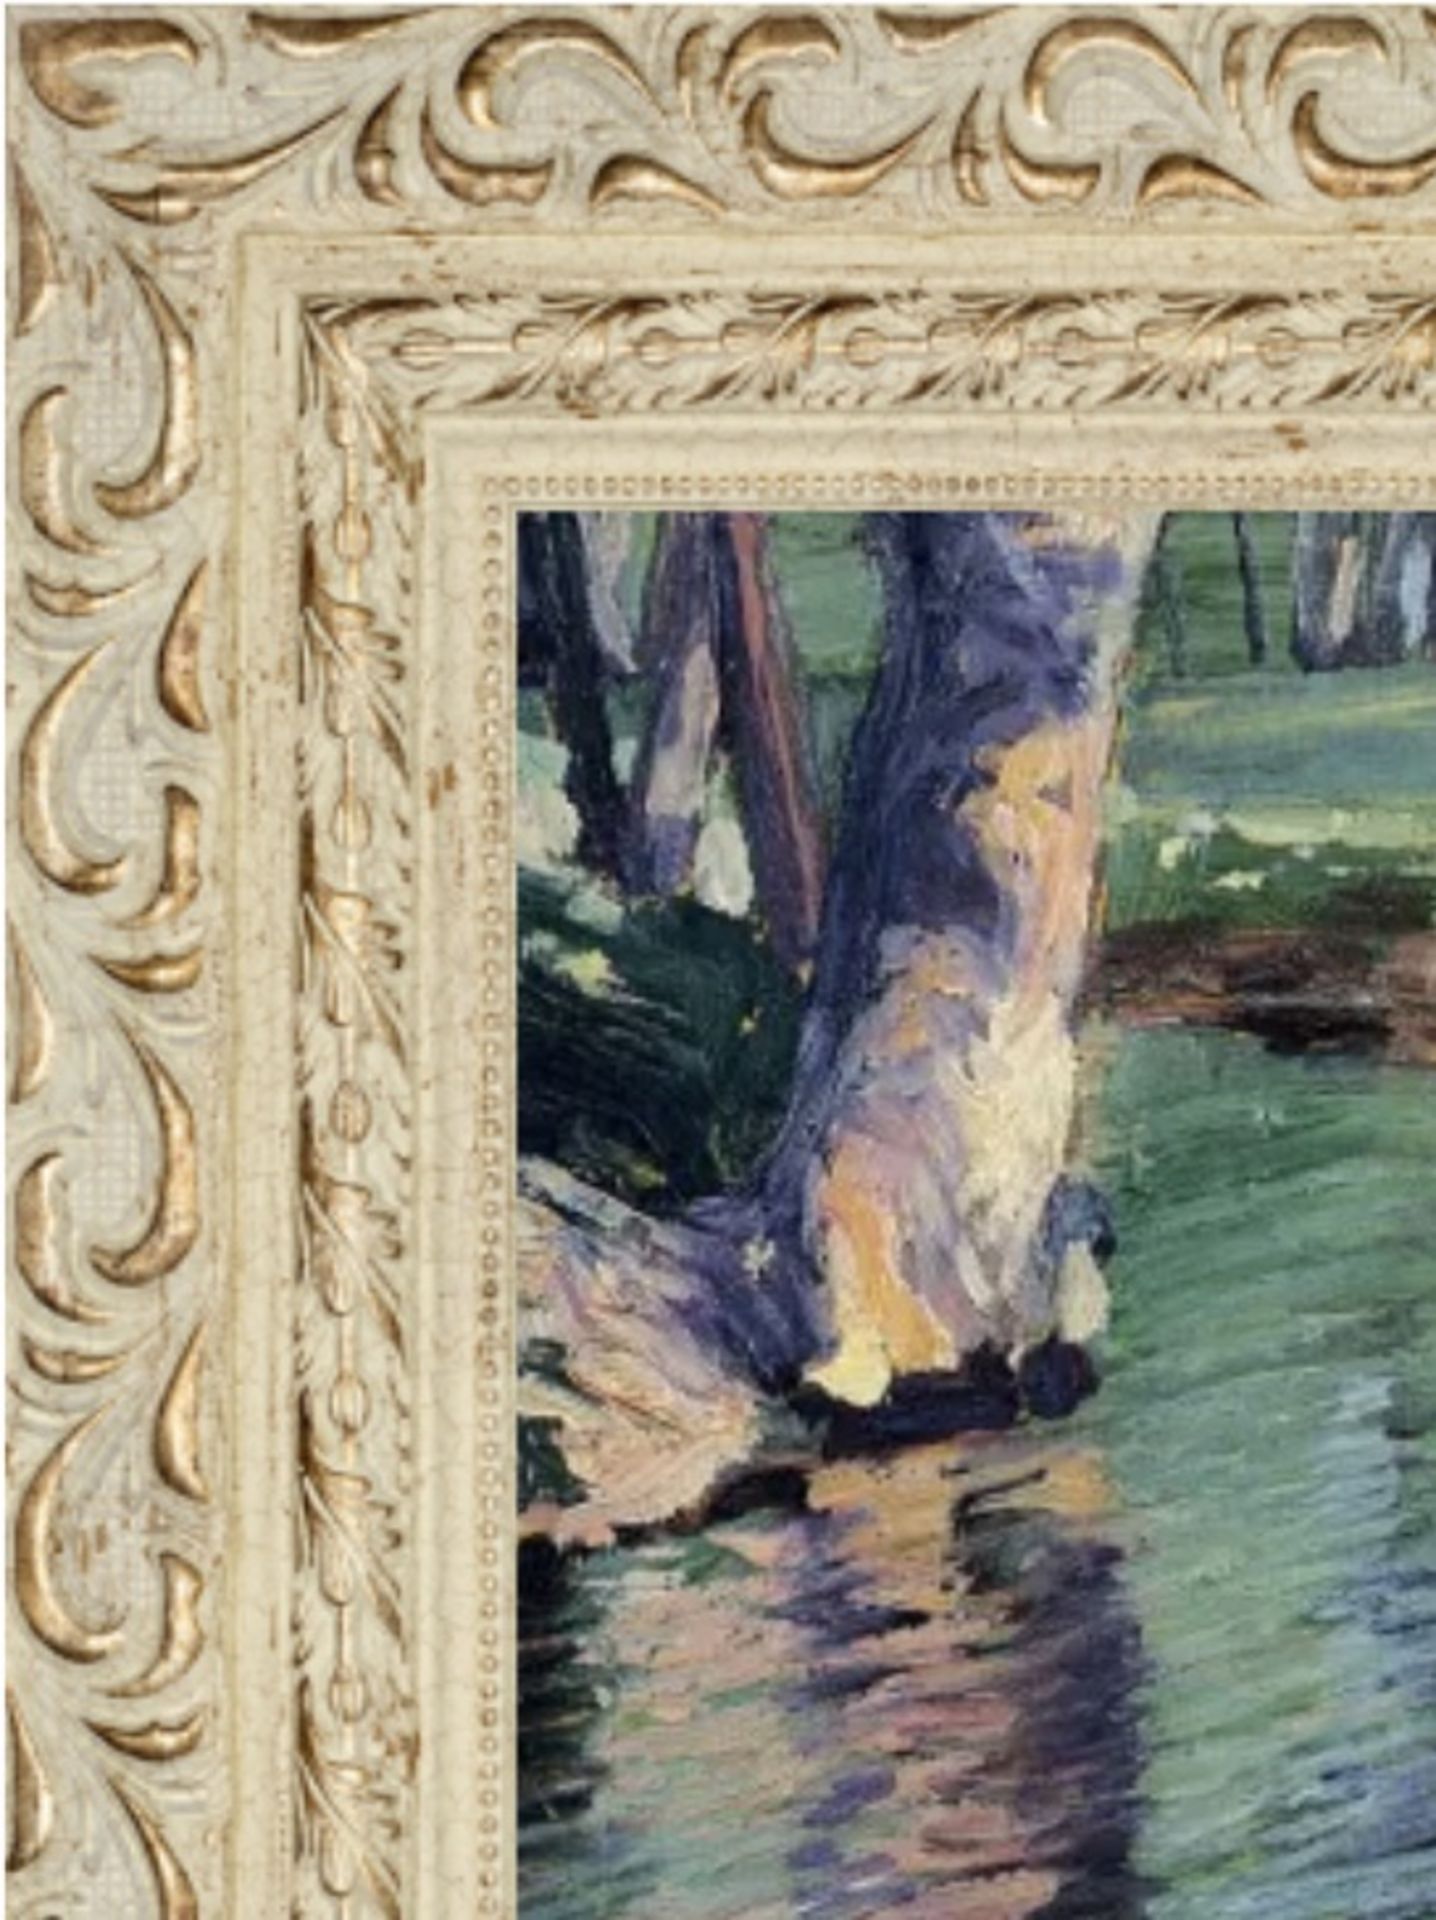 Egon Schiele "Trees Mirrored in a Pond" Oil Painting - Image 5 of 5